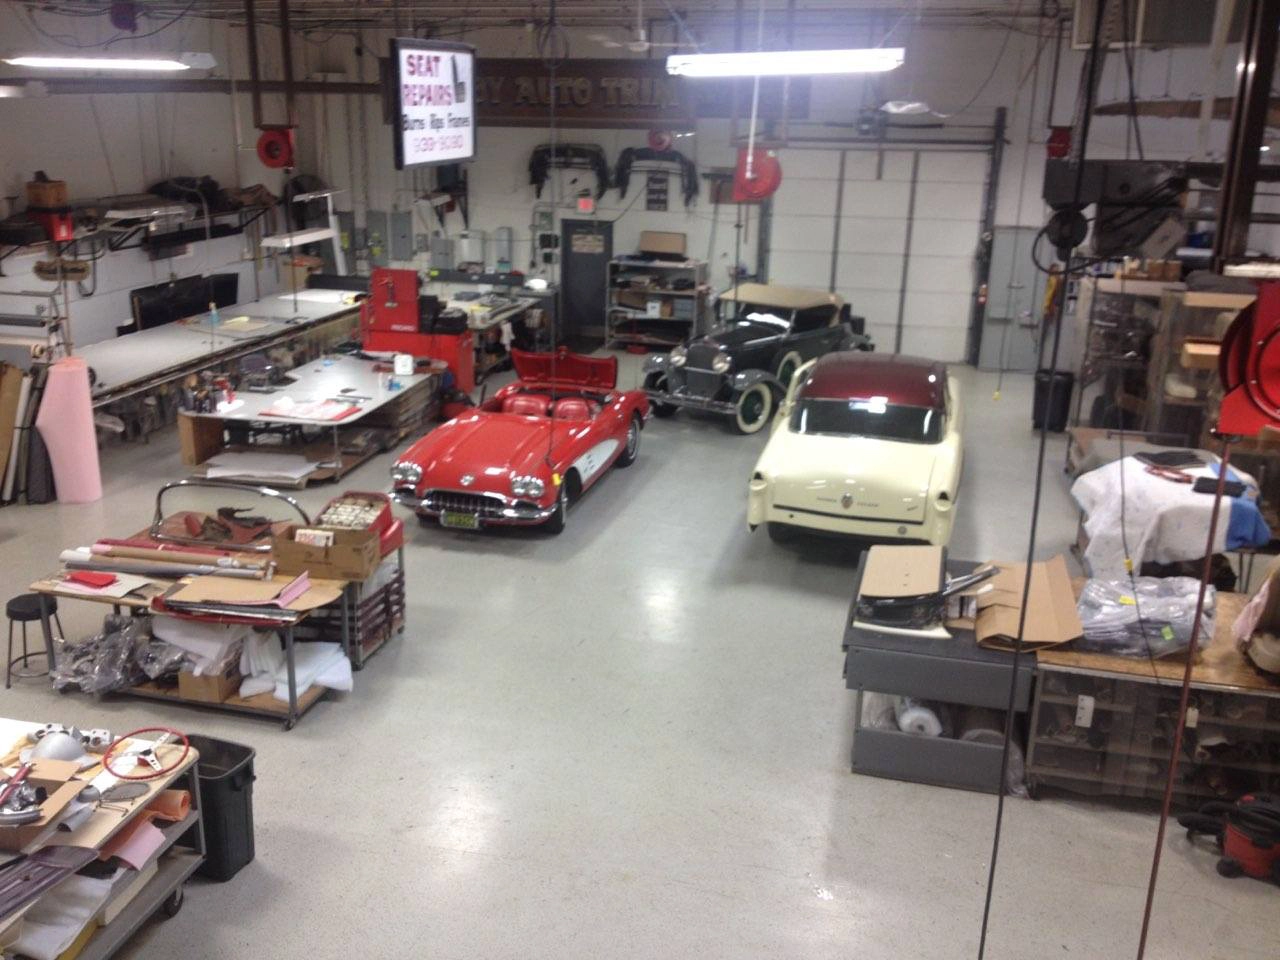 Shop Floor with red convertible